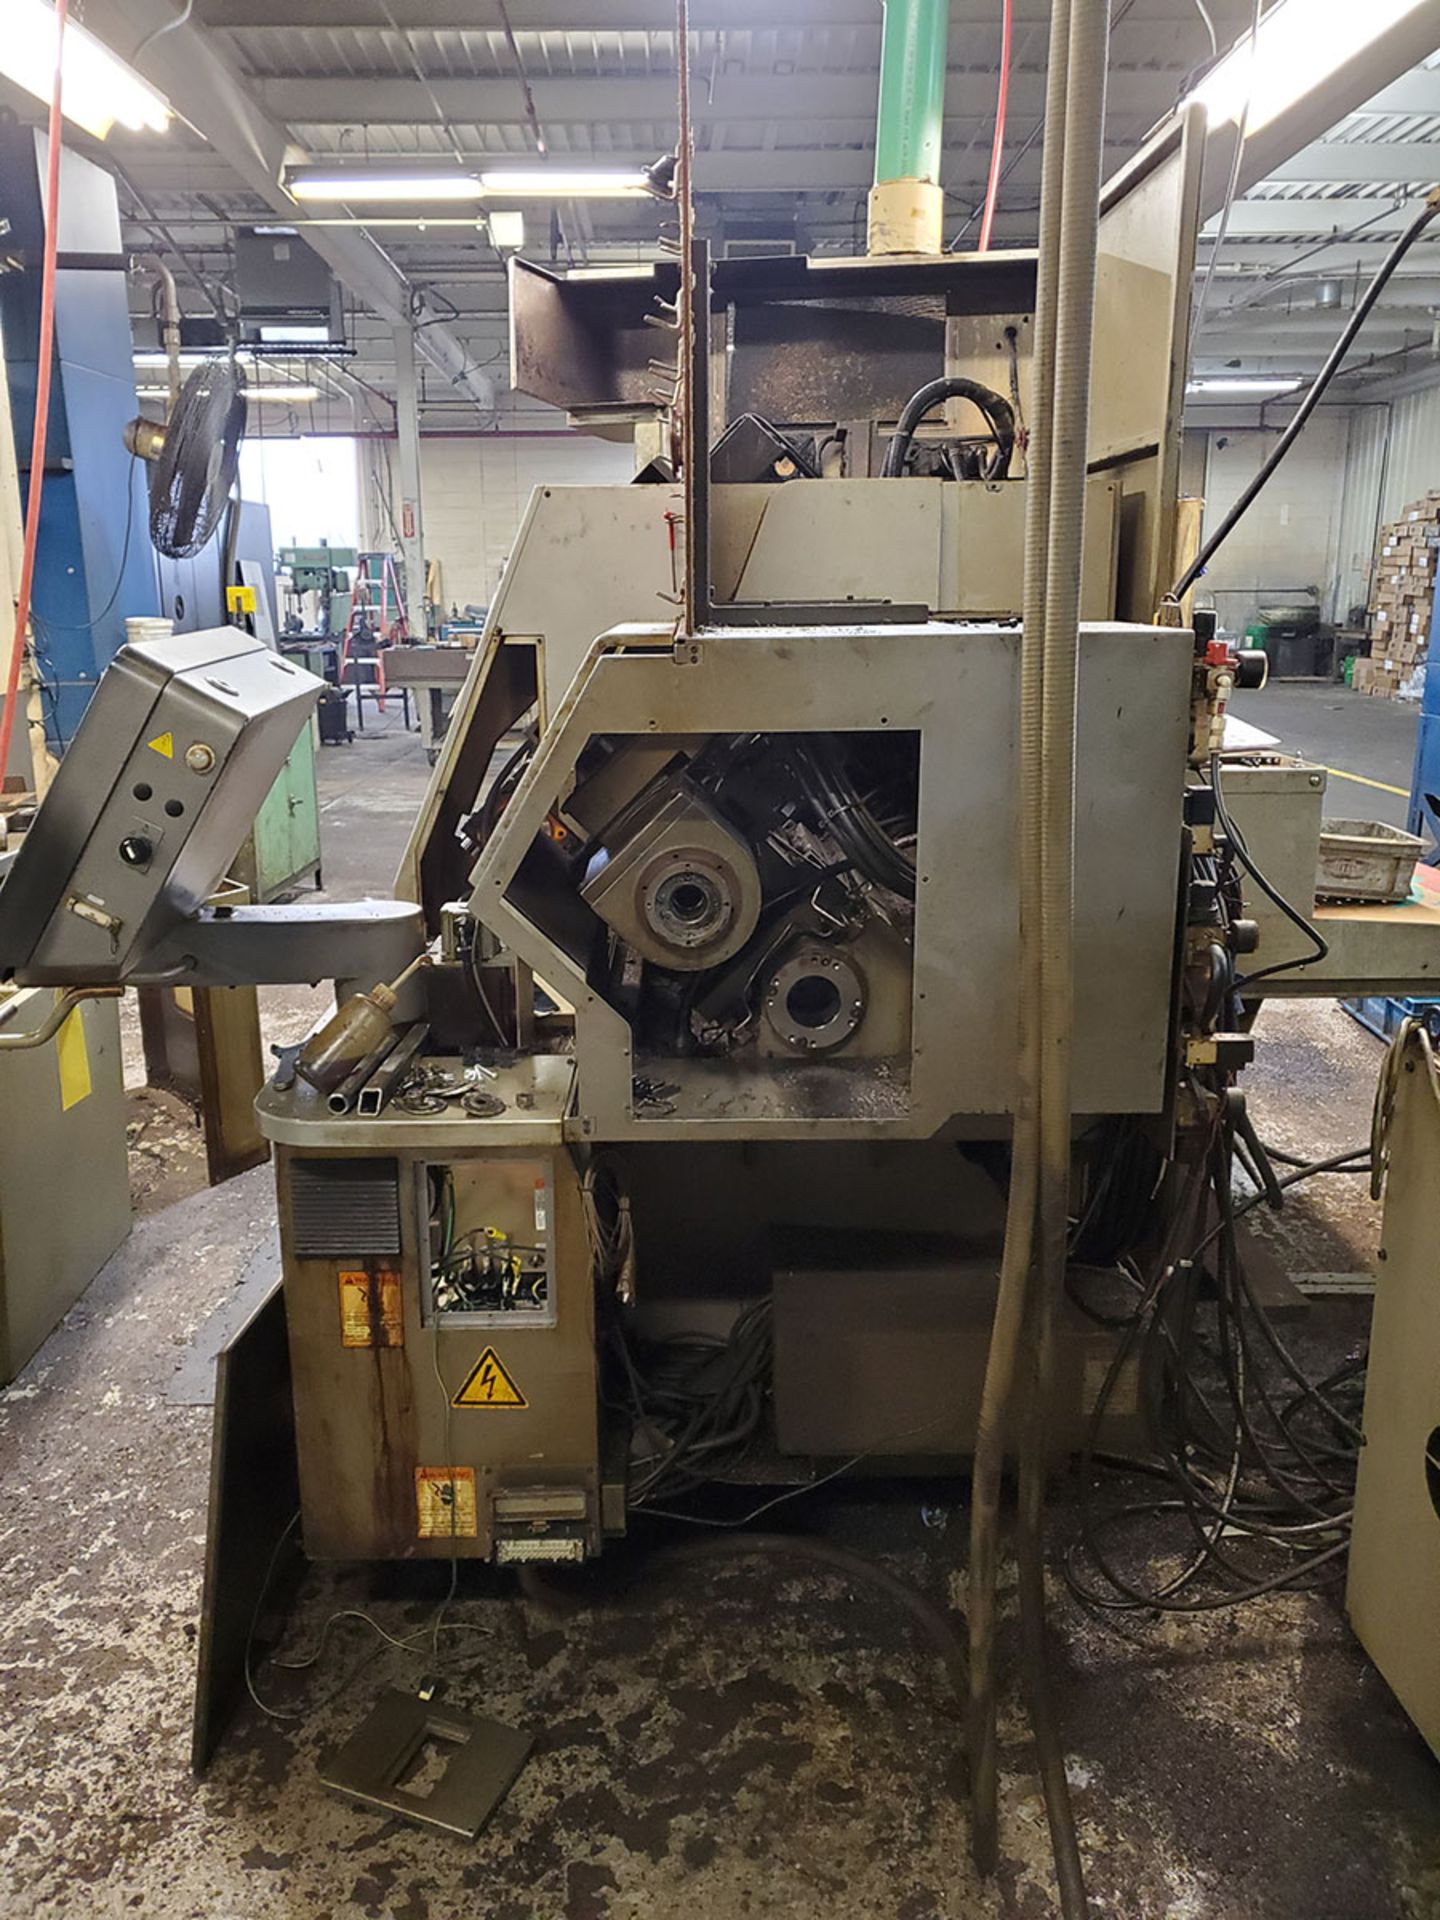 CITIZEN SWISS L32 HORIZONTAL LATHE (OUT OF SERVICE, PARTIALLY DISASSEMBLED), NOT OPERATIONAL - Image 9 of 15